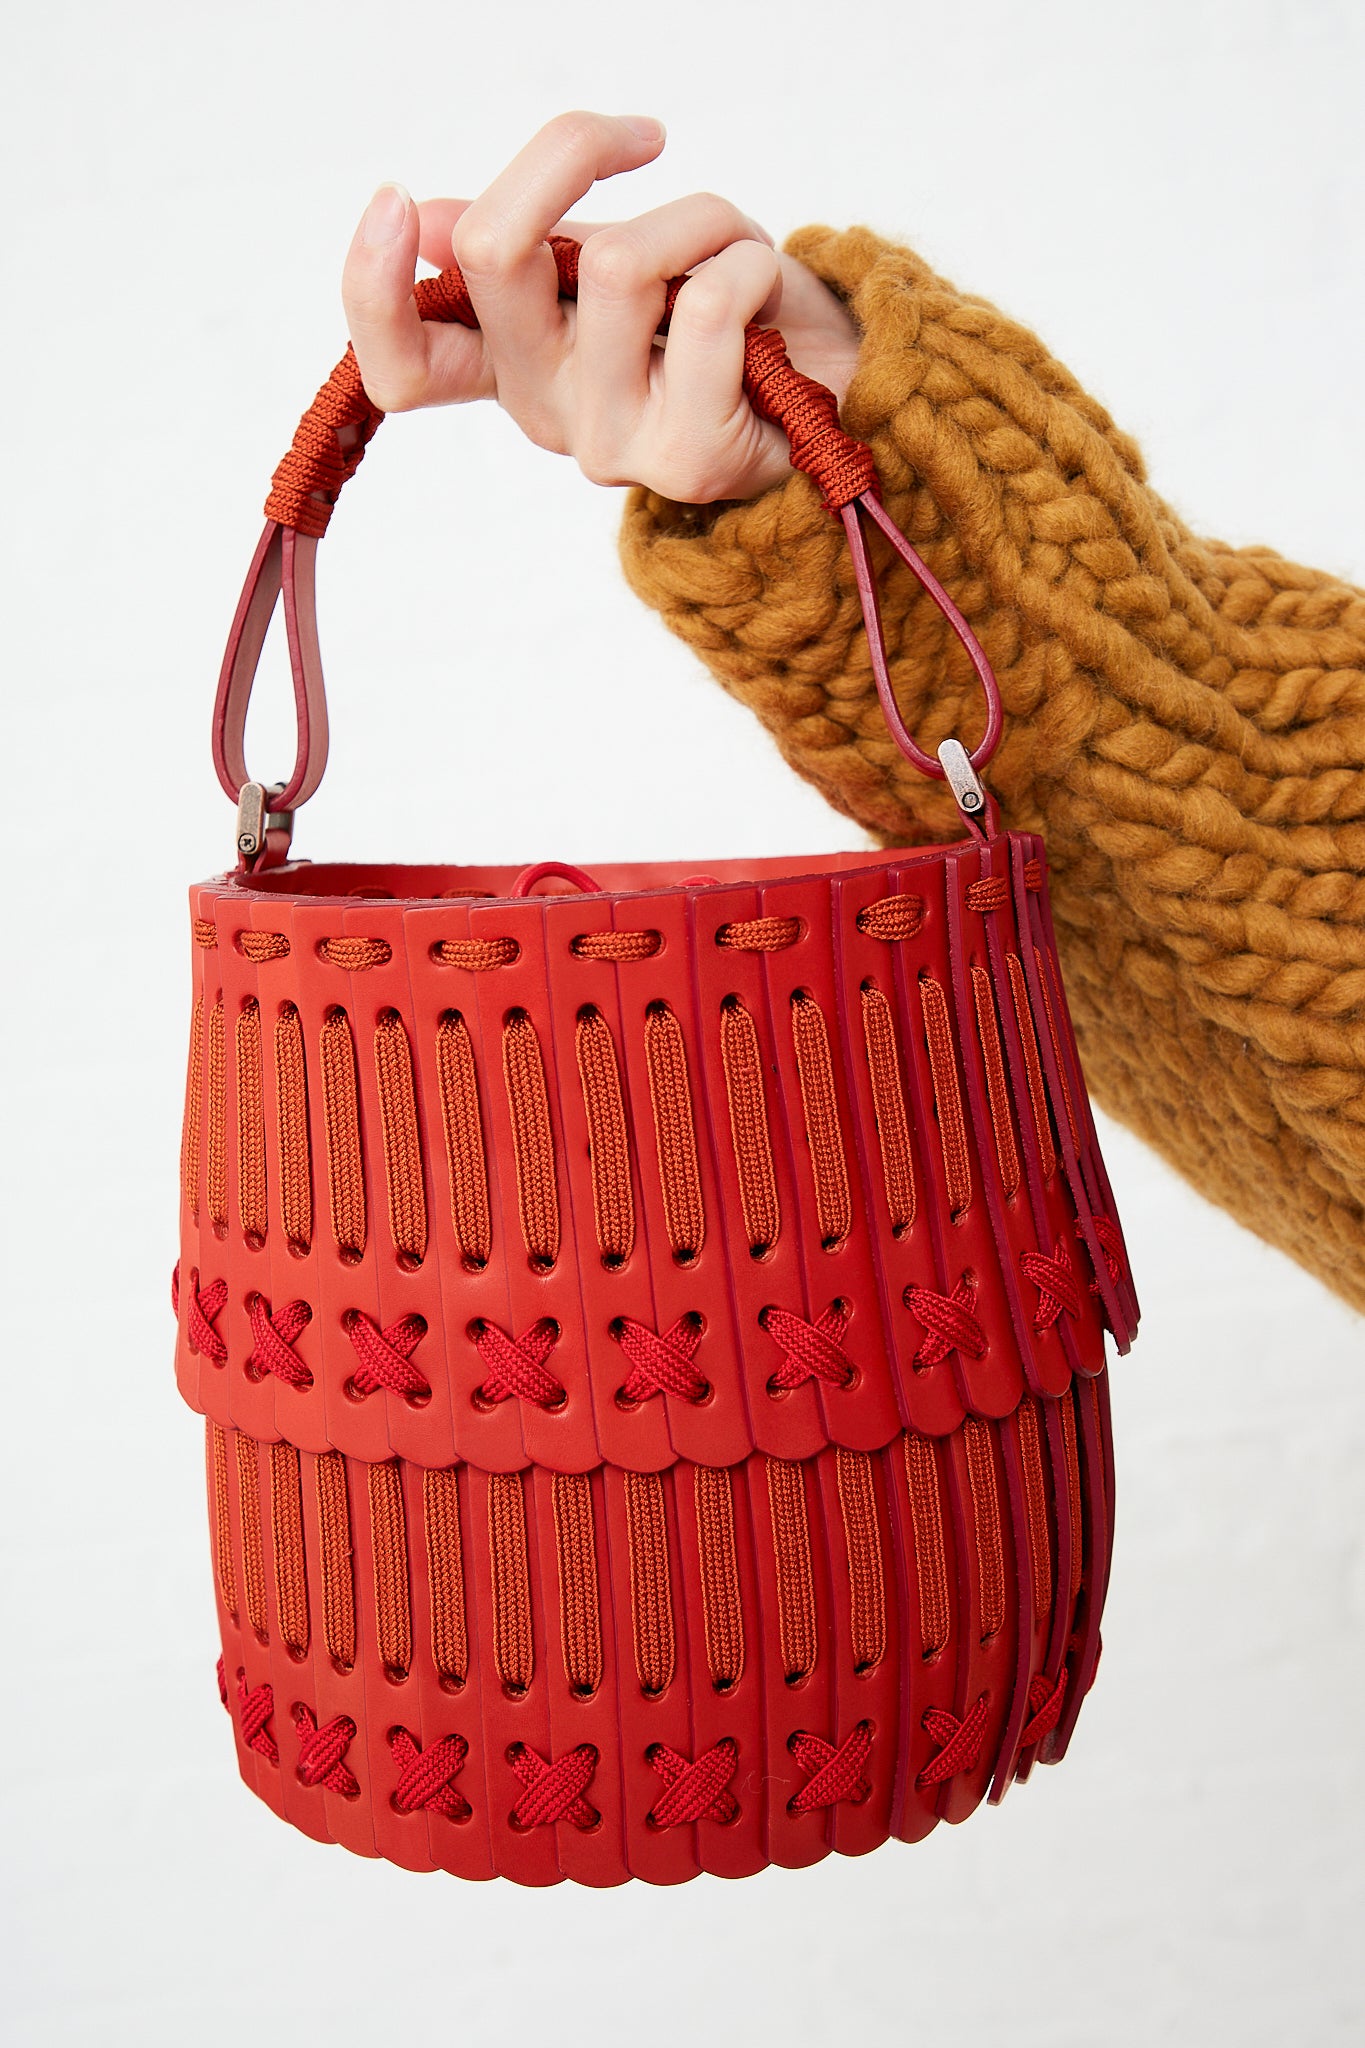 A person holding a Hatori Bucket Bag 80 in Amaranto, Cherry and Tangerine with an adjustable strap.